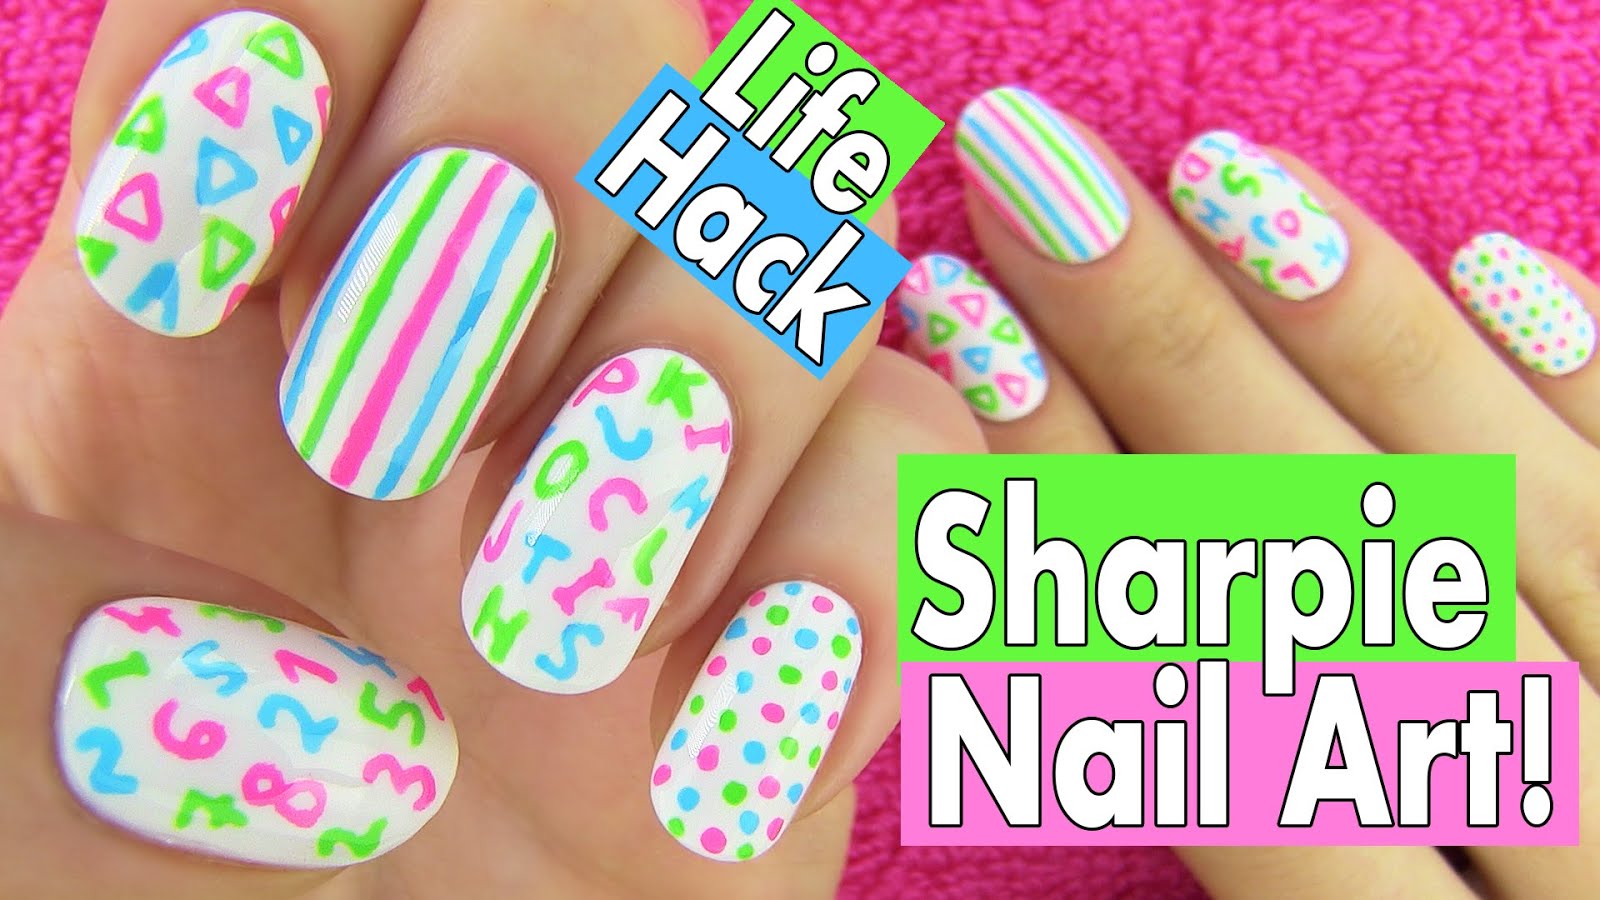 5. Nail Art Hacks: Using Silicone Molds - wide 7